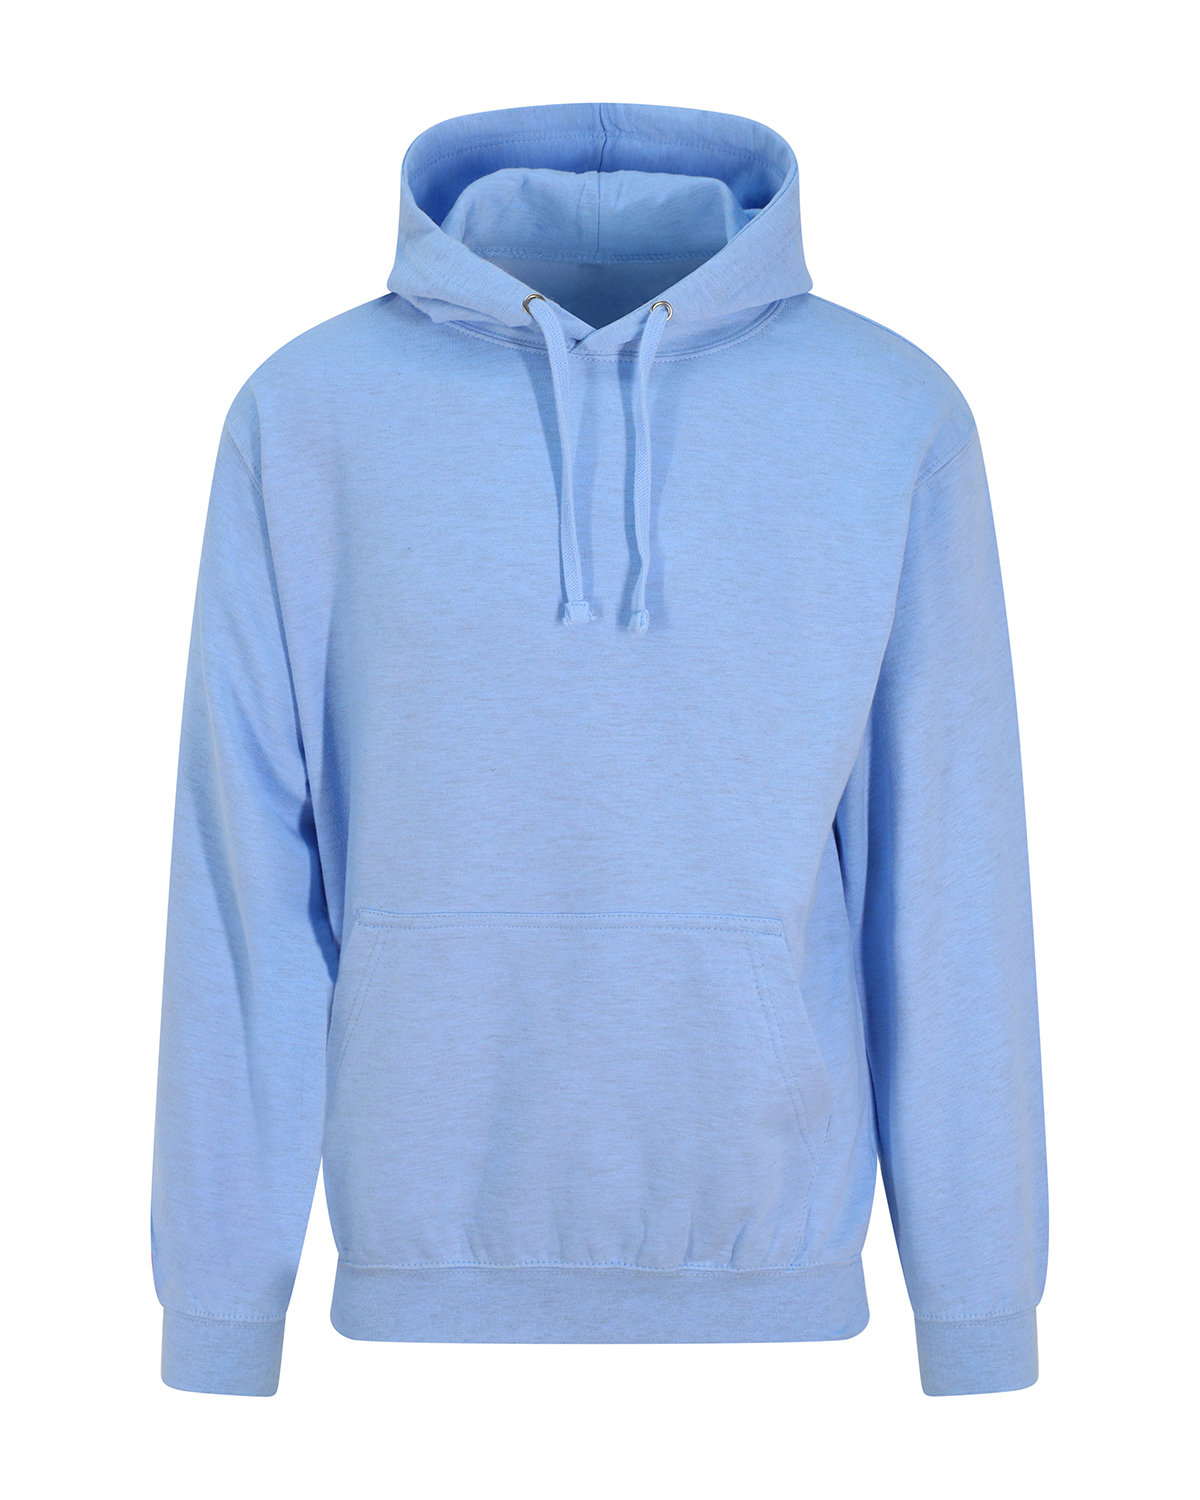 Adult Surf Collection Hooded Fleece-Just Hoods By AWDis